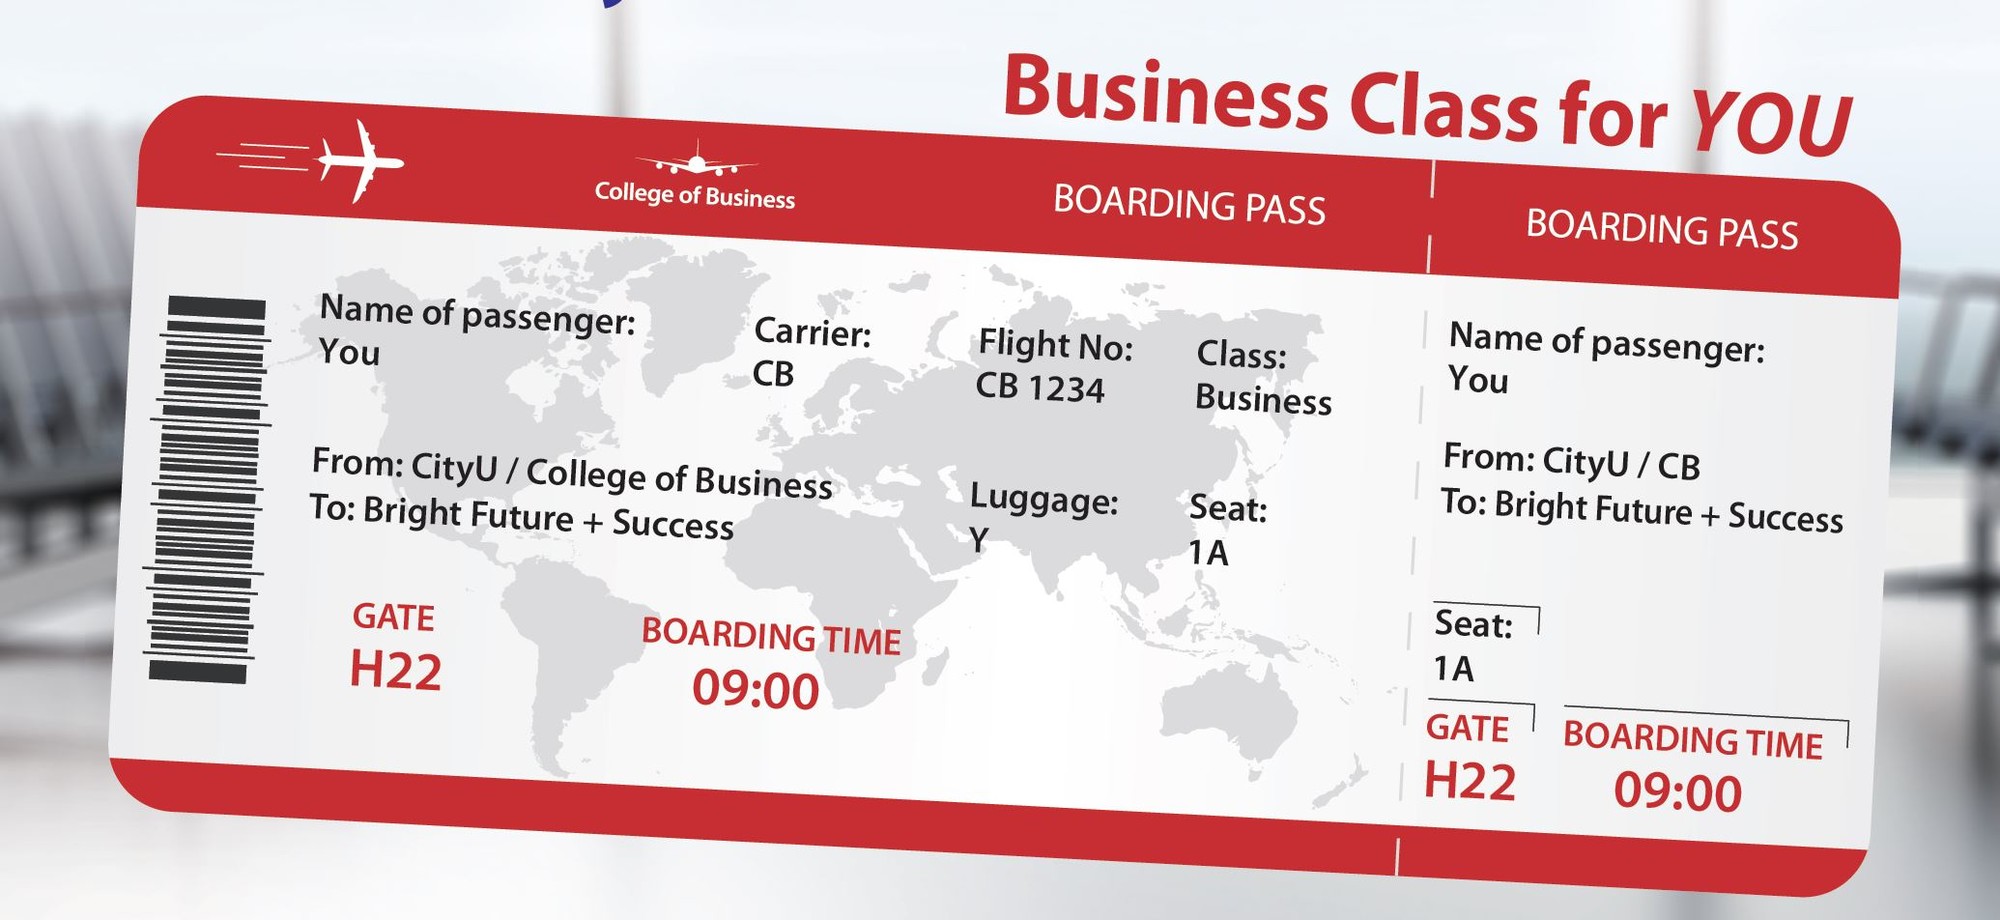 Business Class for You